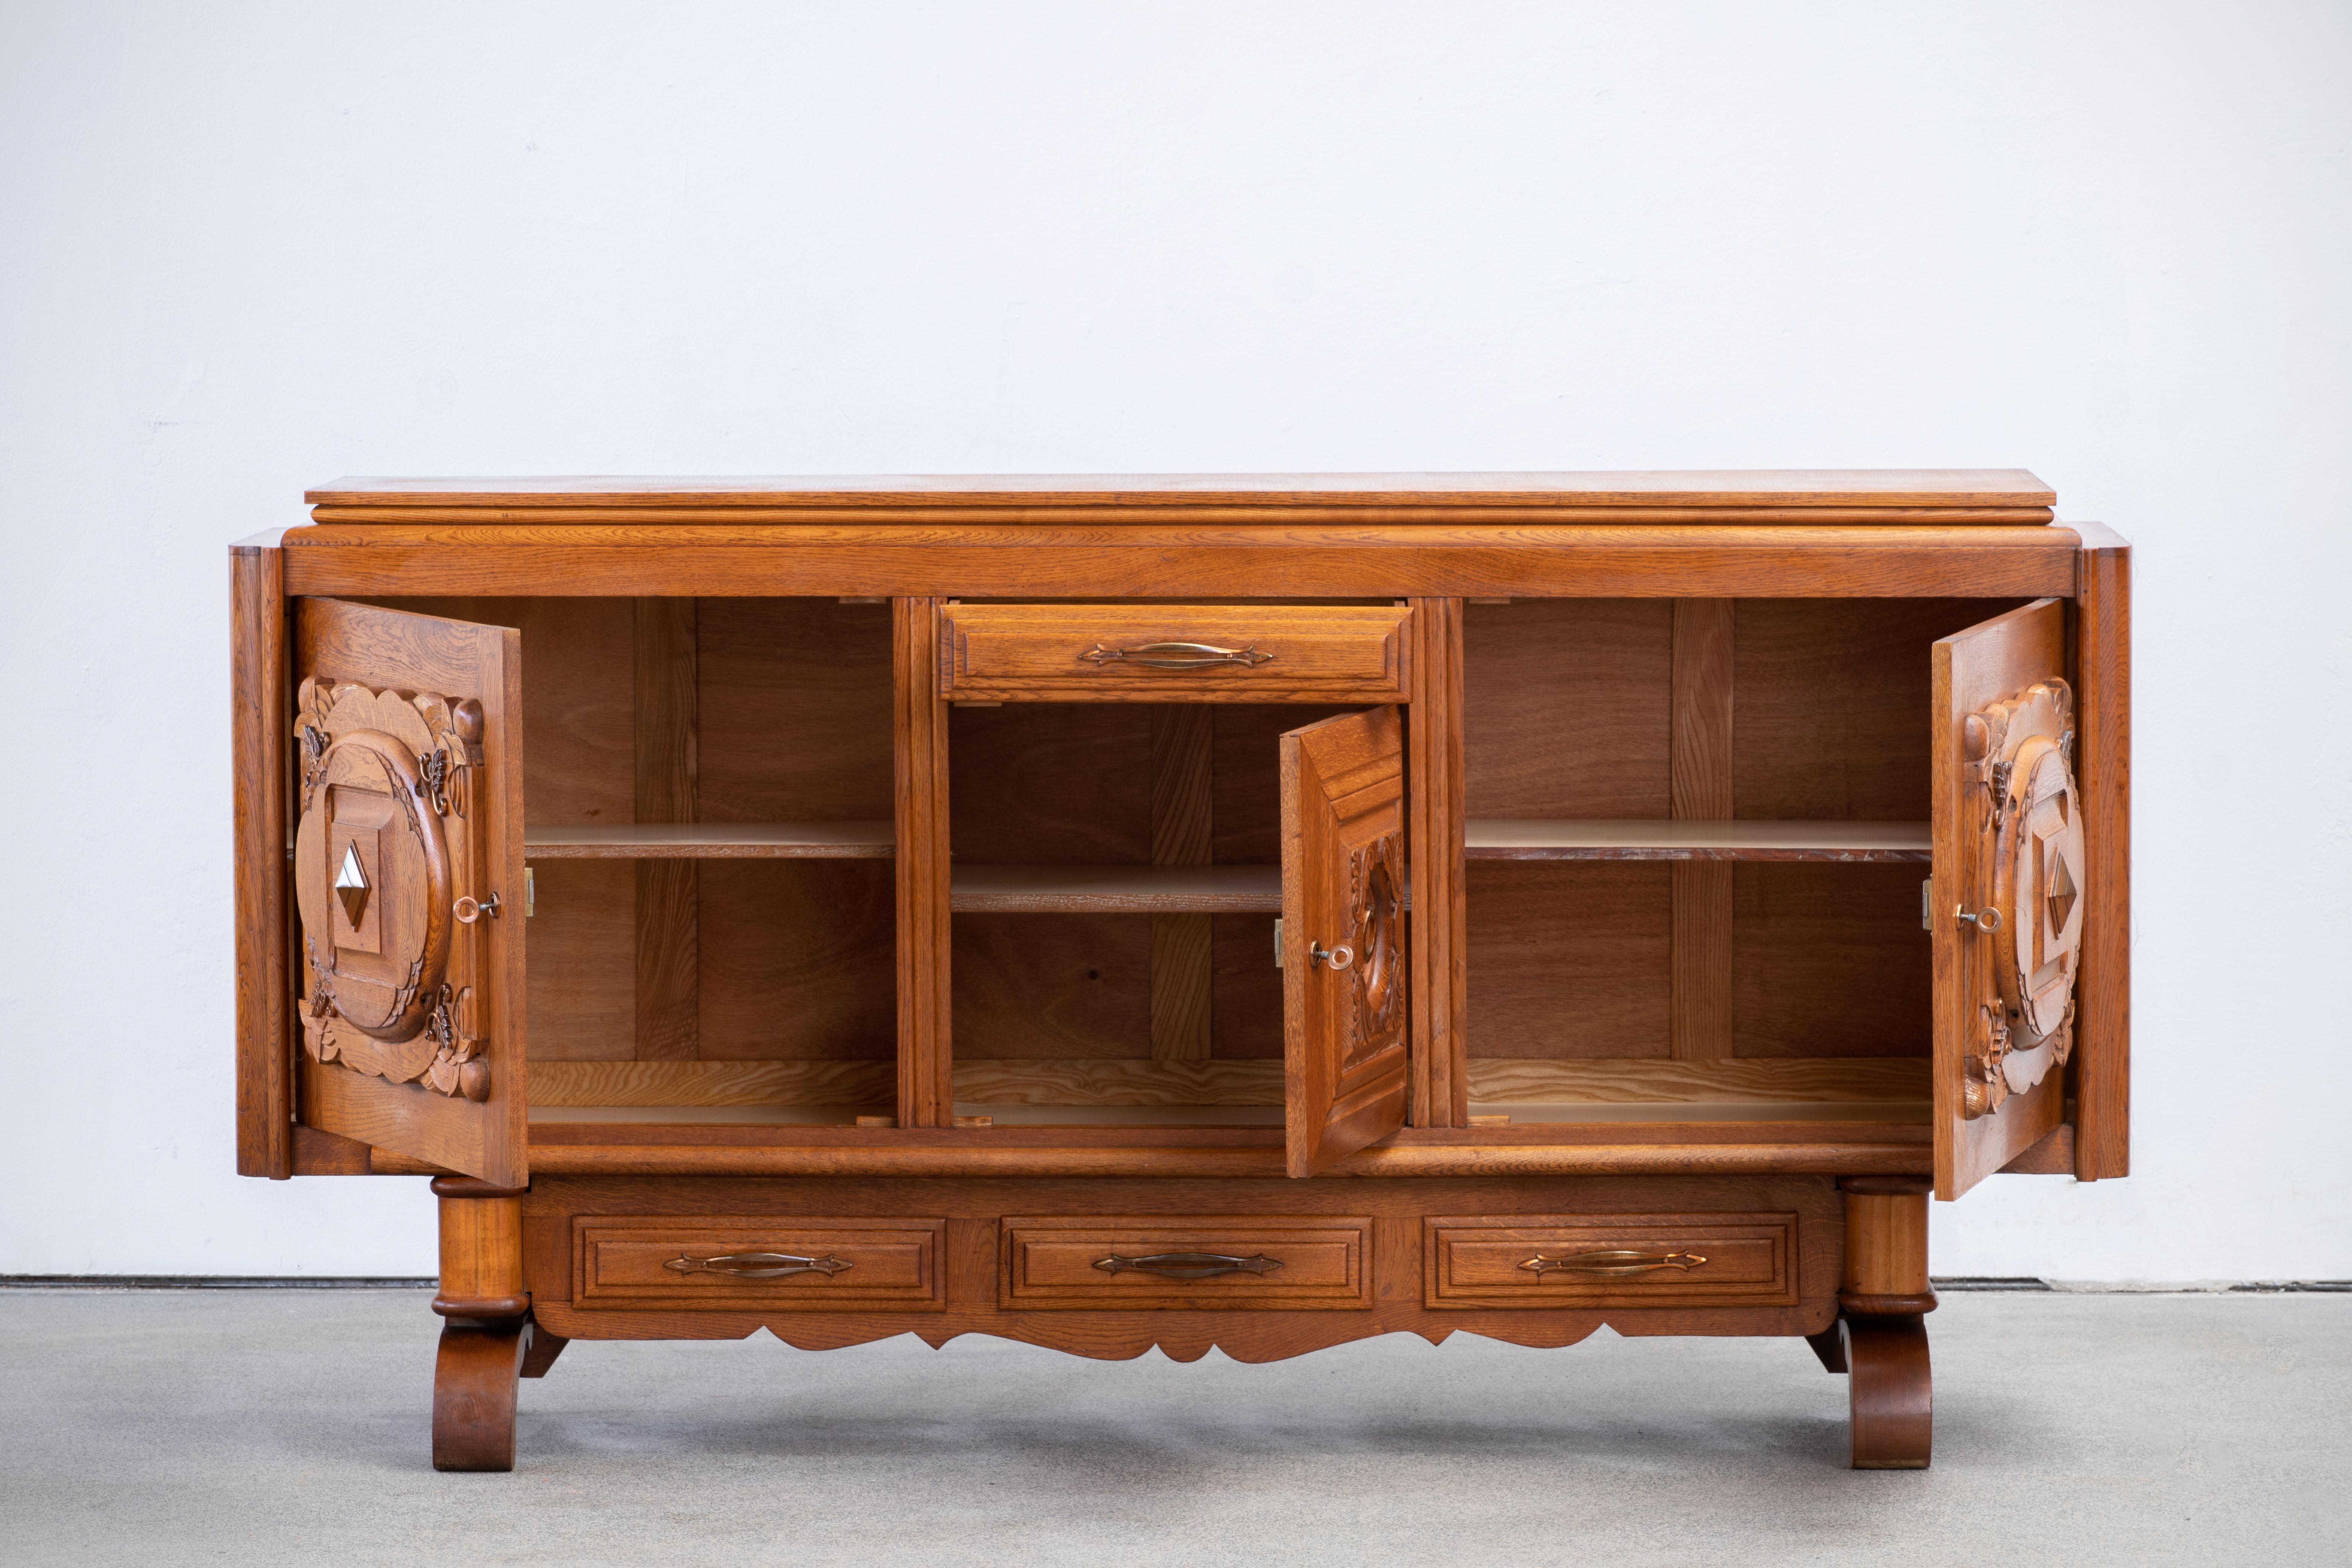 Sideboard, oak, France, 1940s

The sideboard is in excellent original condition, with minor wear consistent with age and use.
 